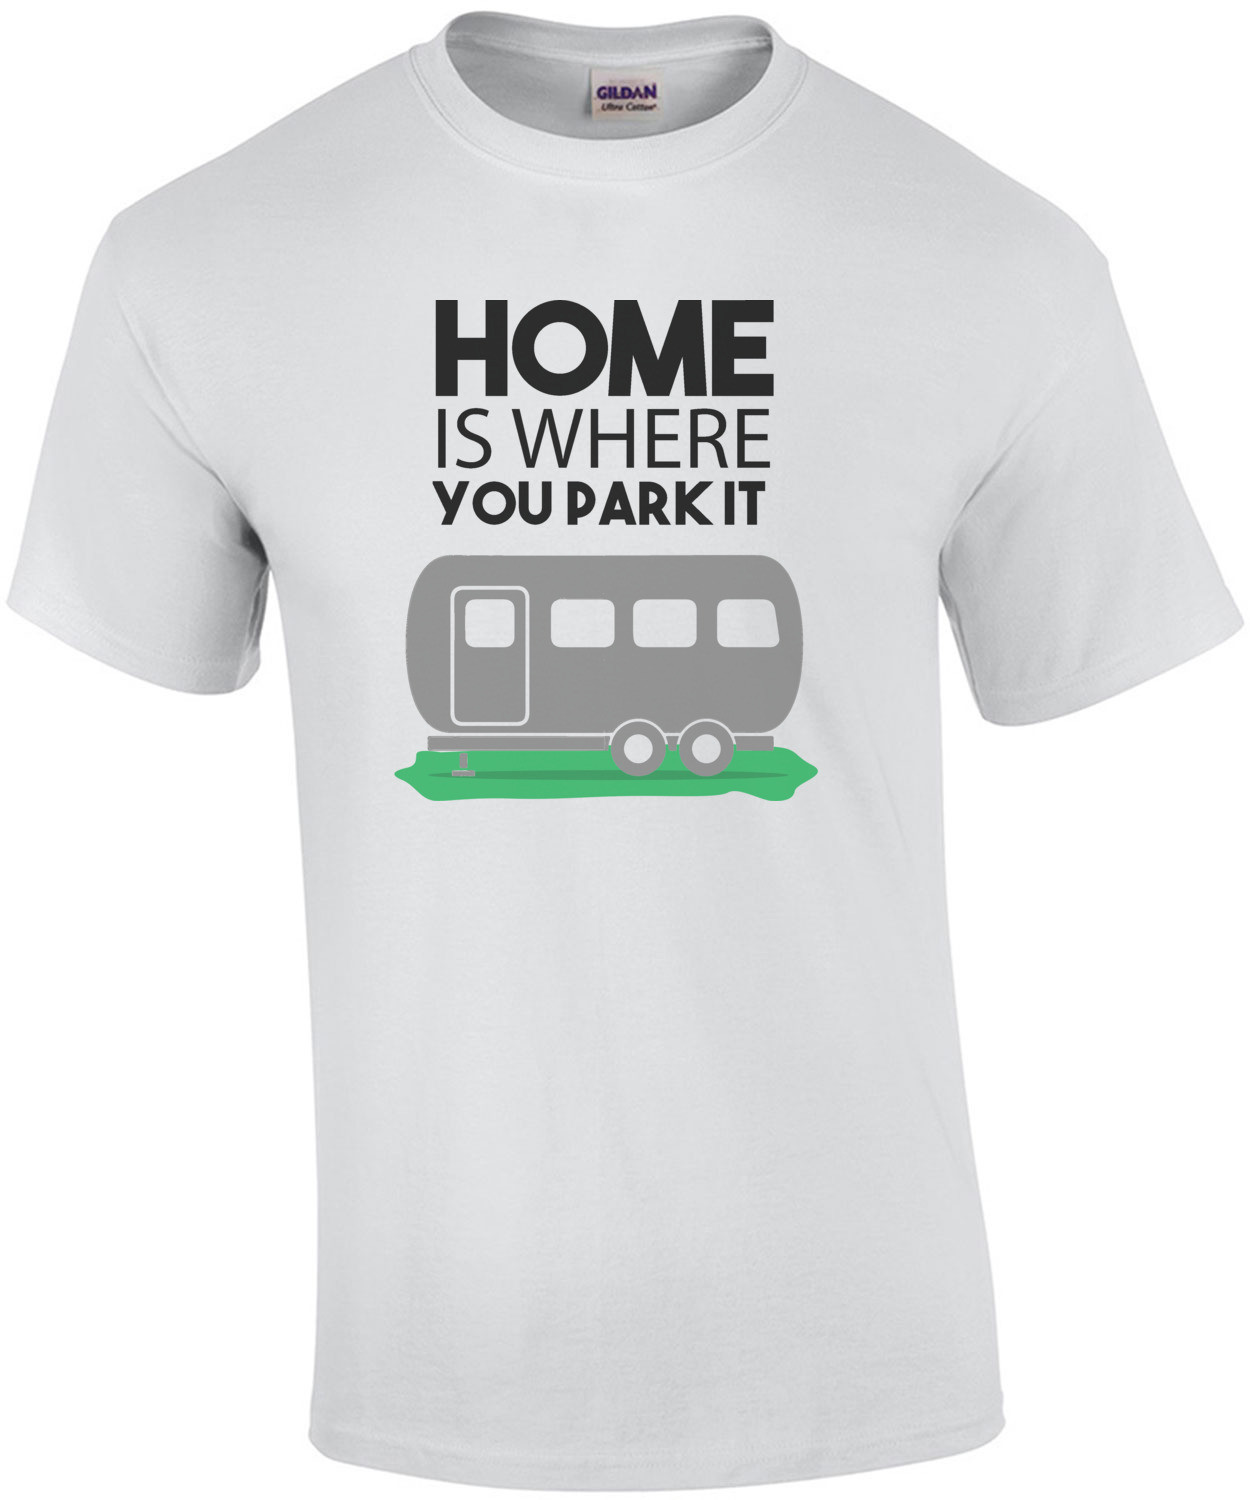 Home is where you park it - RV Camping